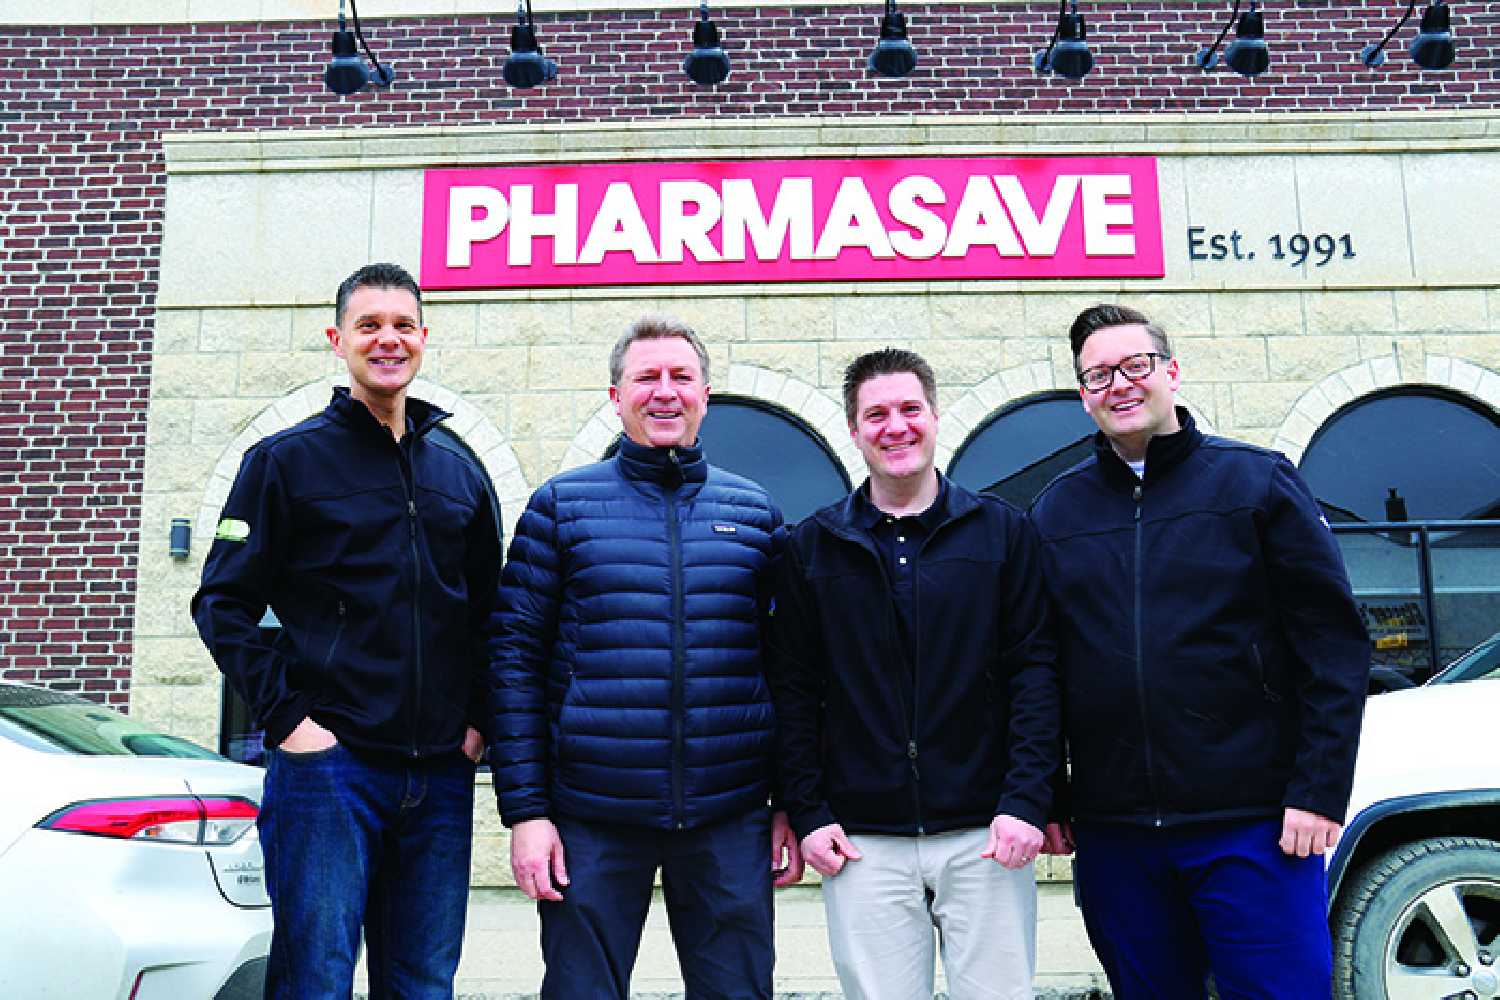 New owners for Moosomin Pharmasave Legacy Pharmacies has purchased Moosomin Pharmasave. From left are Chris Fedorowich with Legacy Pharmacies, Darcy Rambold, the former owner and current manager of Moosomin Pharmasave, and Warren Delmage and Brad Cooper with Legacy Pharmacies. Moosomin Pharmasave has been owned by Darcy Rambold since 2001. Rambold will continue to operate the store as the manager for the next two years. Legacy also owns pharmacies in Redvers, Kipling, Rocanville, Estevan, Souris, Balcarres, and Candle Lake.